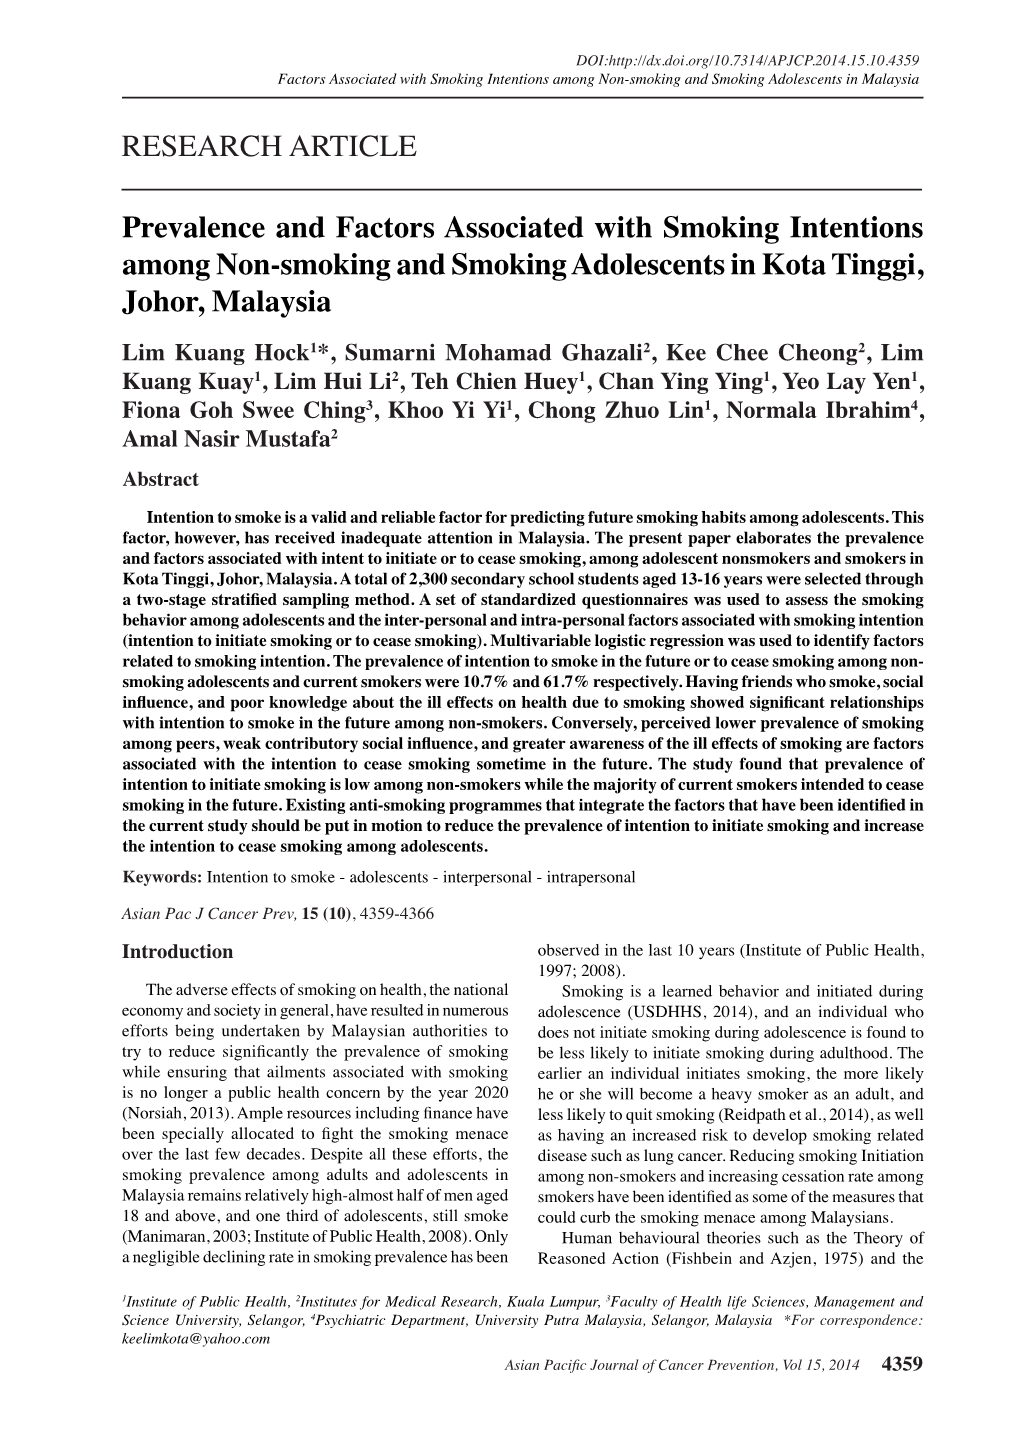 Prevalence and Factors Associated with Smoking Intentions Among